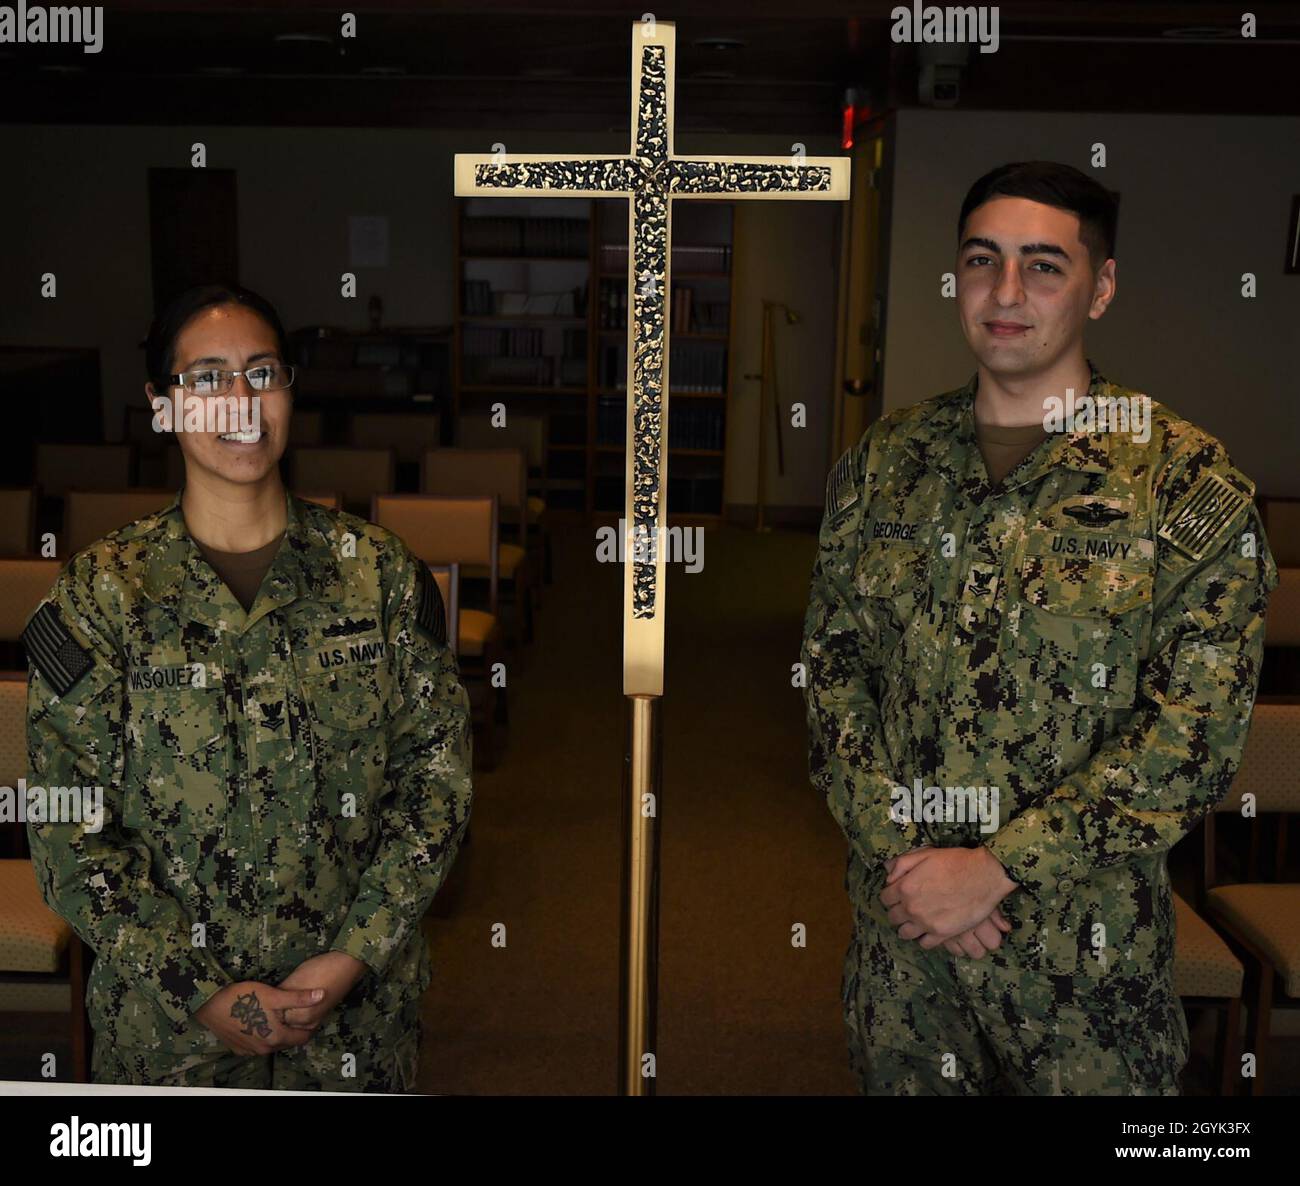 200113-N-XT693-001 NAVAL HOSPITAL BREMERTON, Wash. (Jan. 13, 2020) Religious Program Specialists (RP) 2nd Class Christopher George (right) and Pricilla Vasquez take a pause in the chapel at Naval Hospital Bremerton (NHB). As part of the command's Pastoral Care Department, both RP’s help to prepare devotional materials, organize faith-based events, maintain religious records, and serve as a source of personal security for the Navy Chaplain Corps. NHB supports more than 60,000 military families in West Puget Sound, shaping military medicine through training, mentoring and research to ensure a re Stock Photo